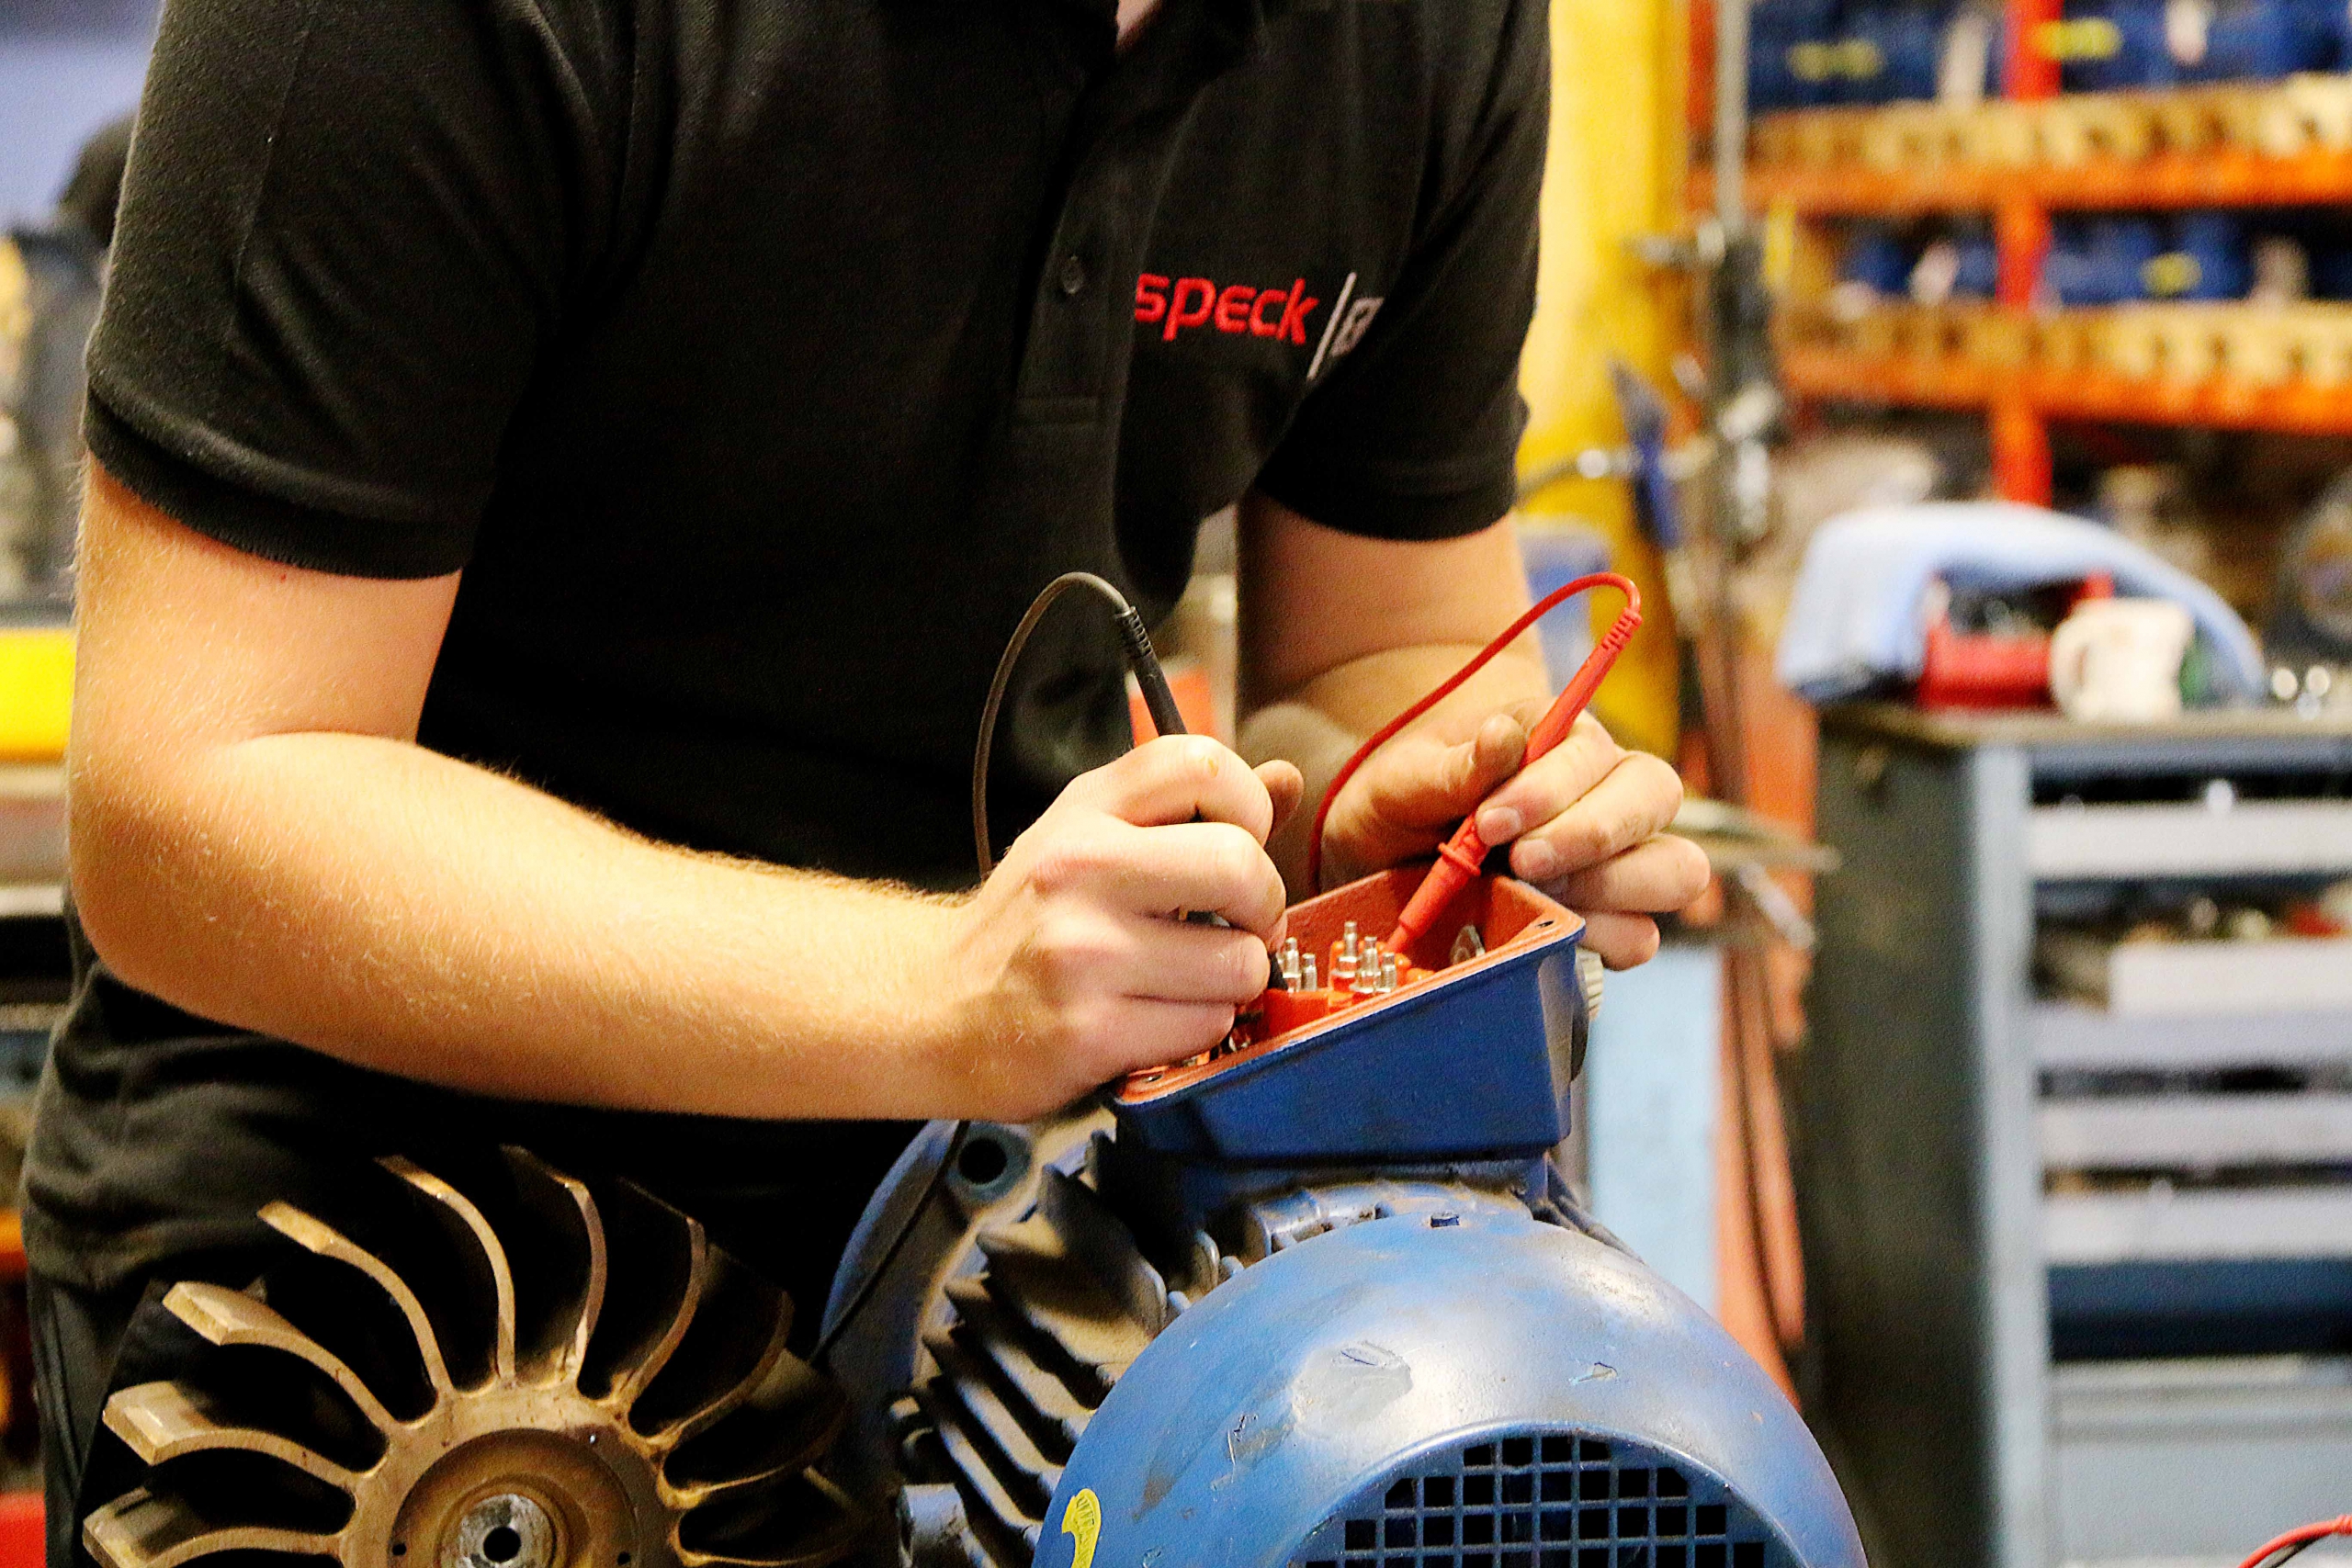 Specialising In Refurbishments On Air Operated Diaphragm Pumps For The Plastics Industry